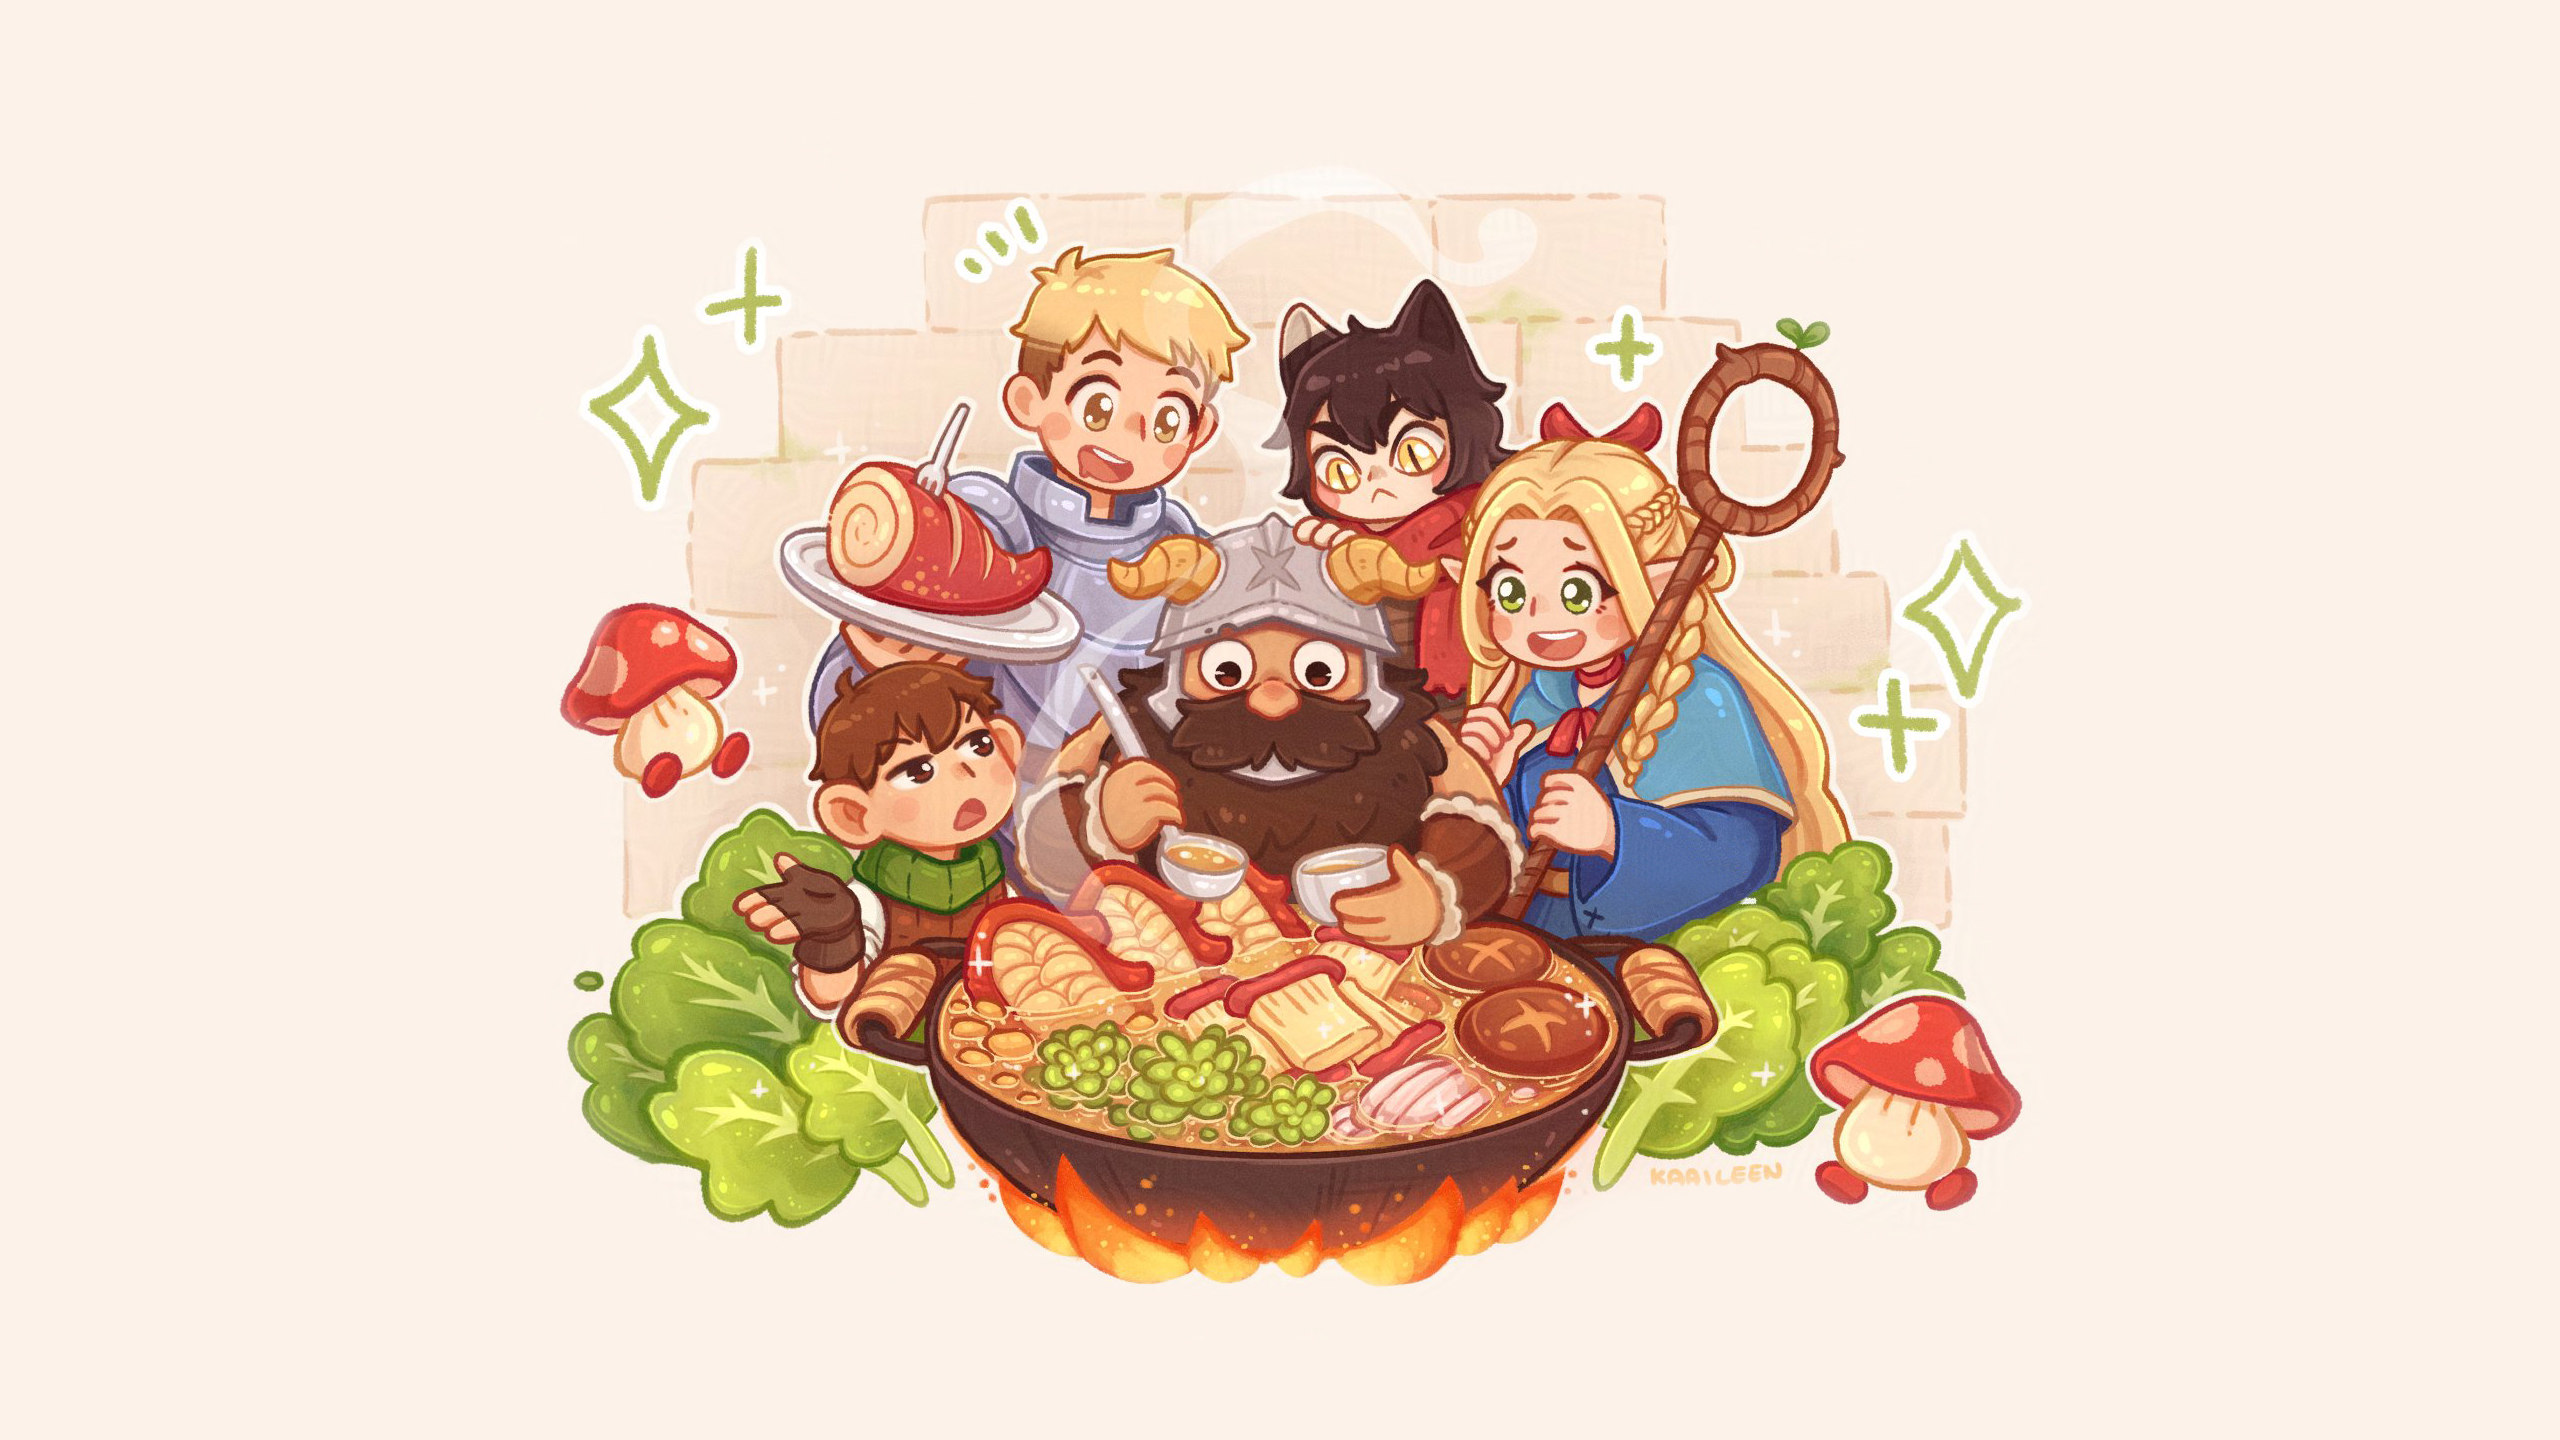 Delicious In Dungeon Chilchuck Tims Laios Thorden Marcille Donato Senshi Delicious In Dungeon Izutsu 2560x1440